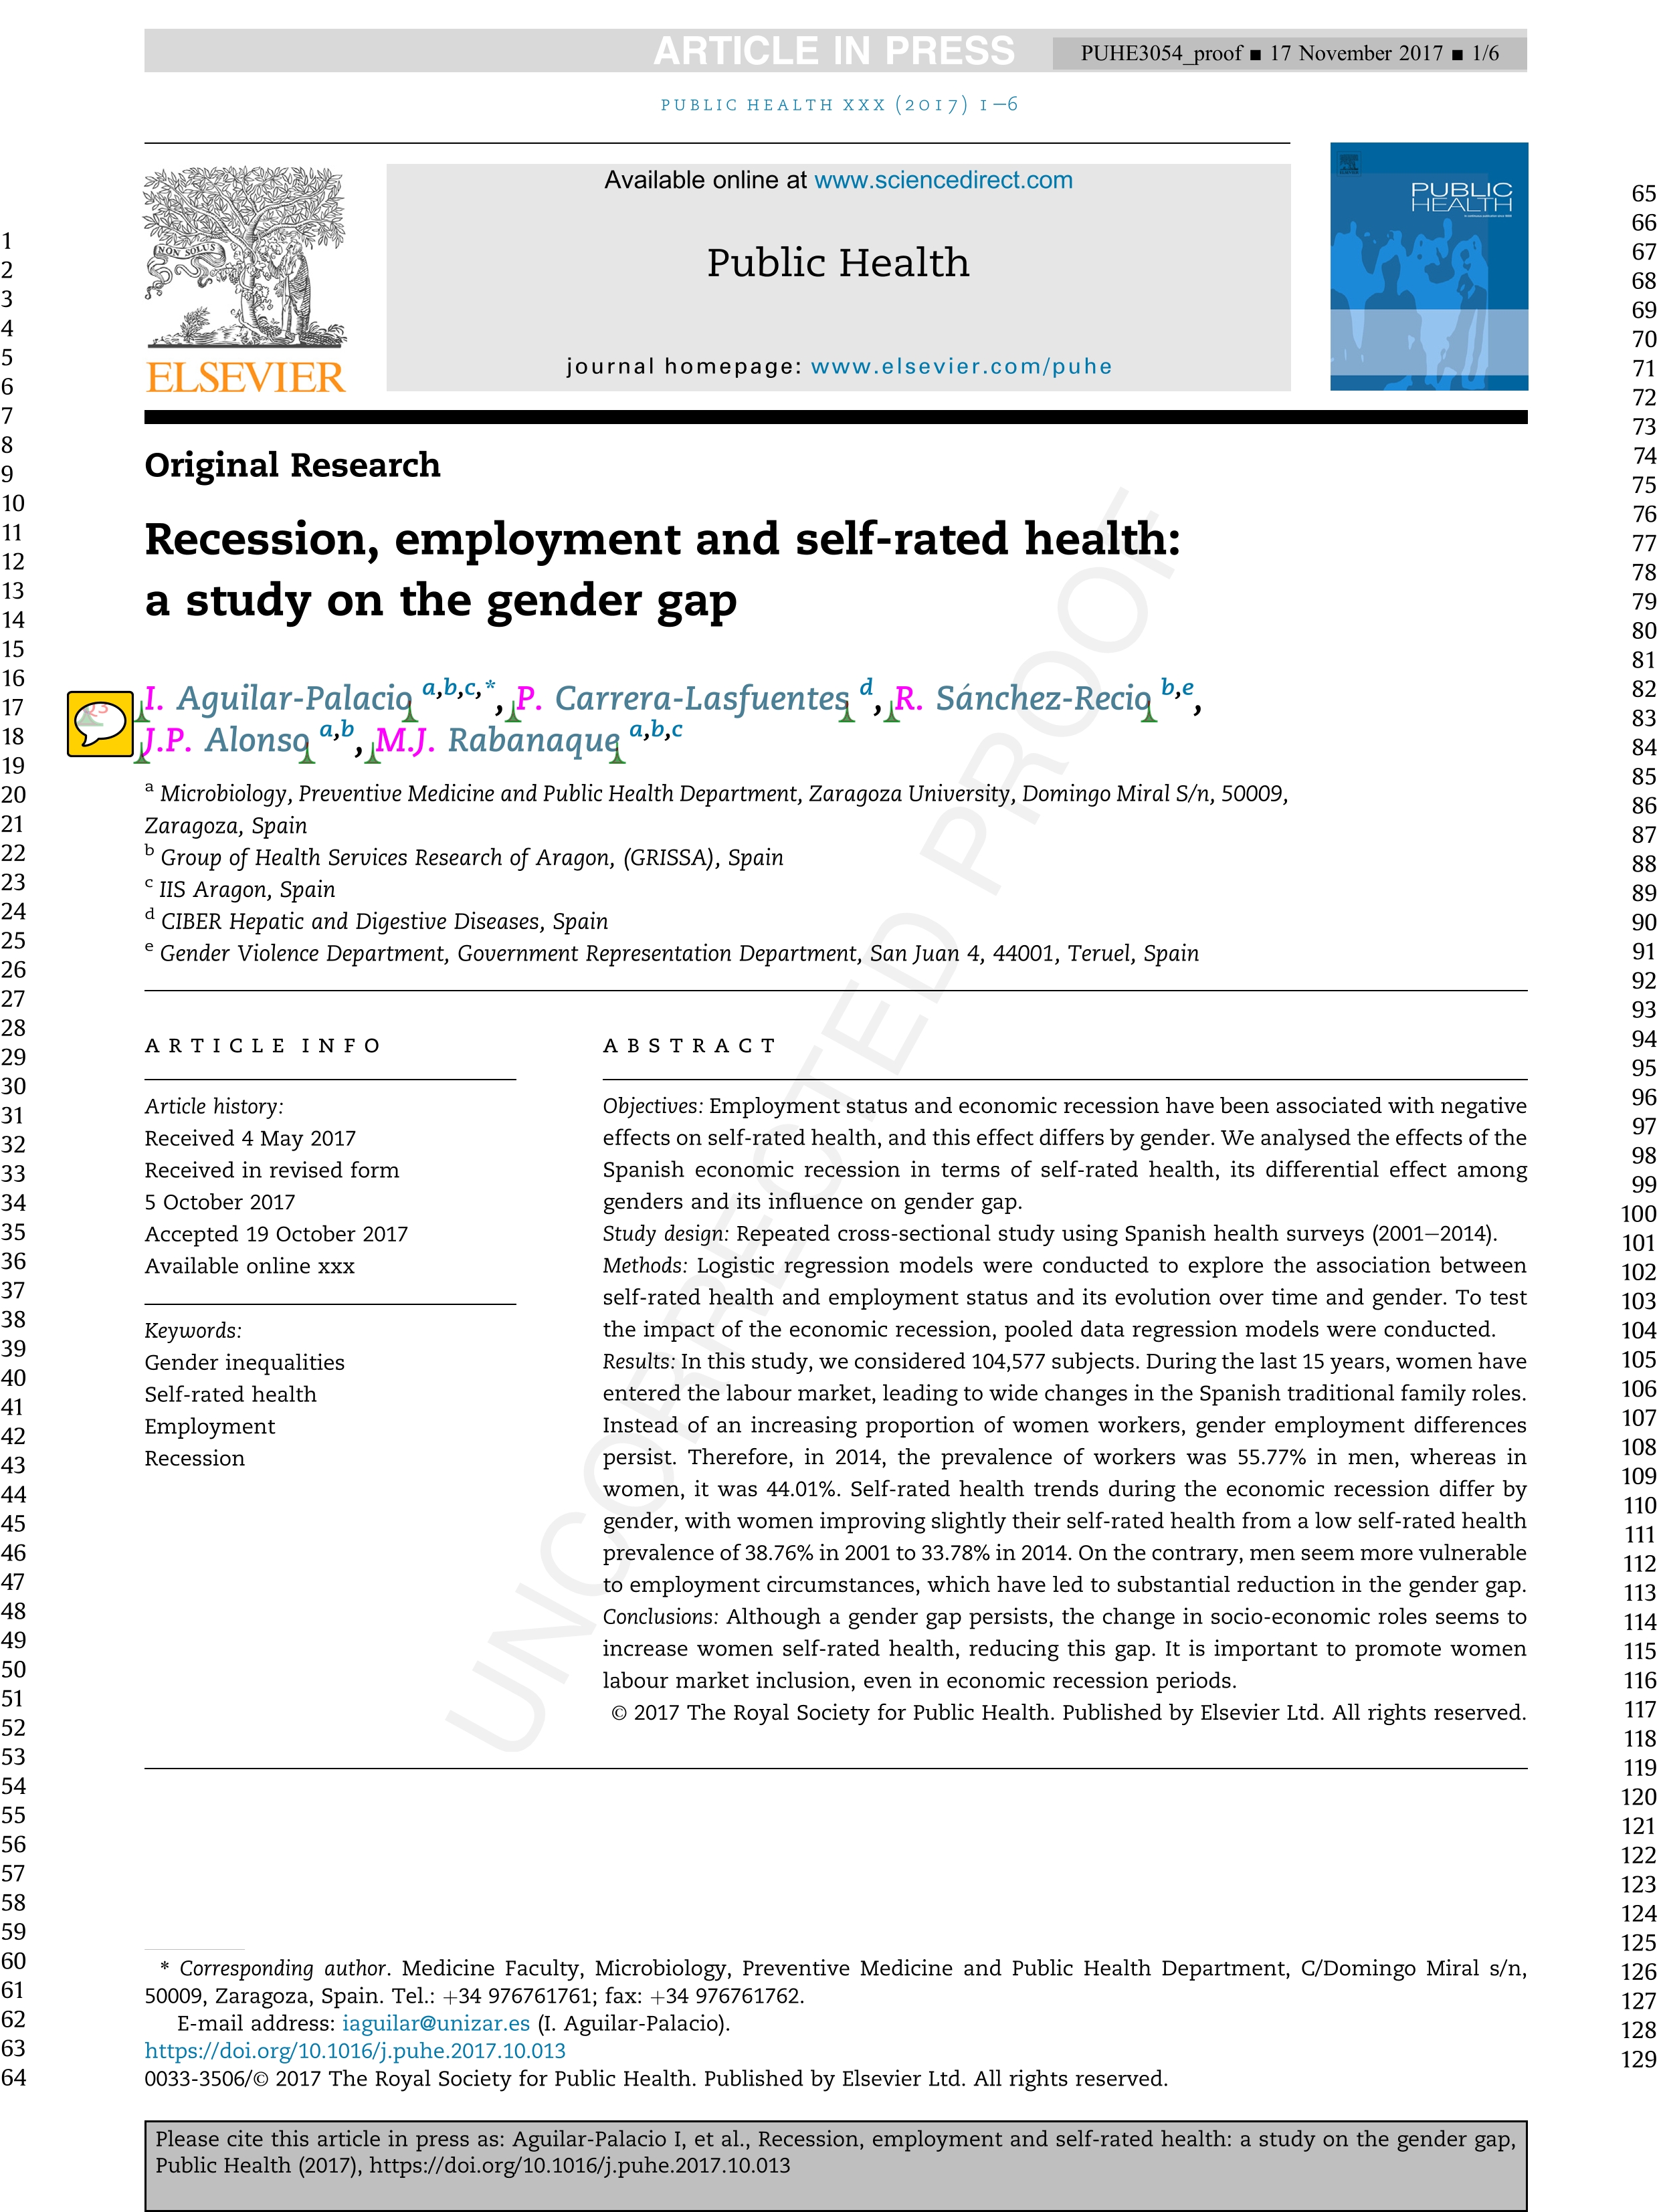 Recession, employment and self-rated health: a study on the gender gap